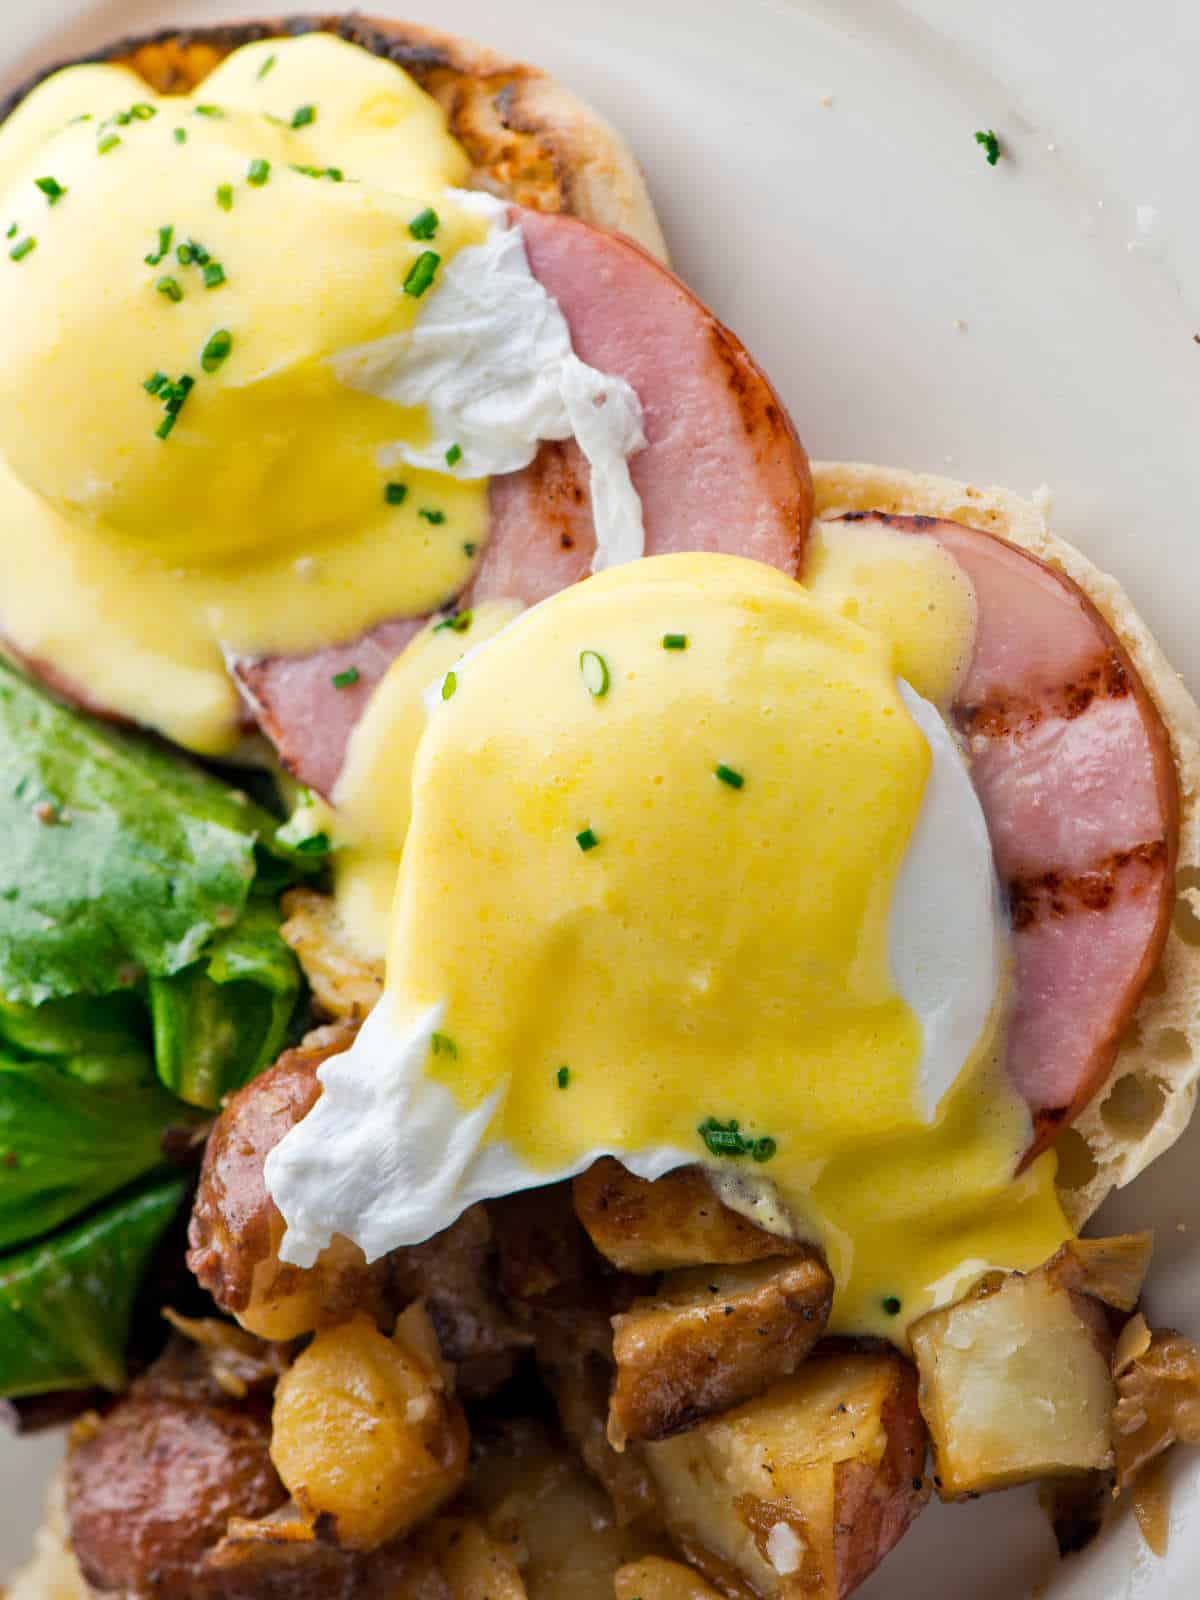 Eggs Benedict on an English muffin.